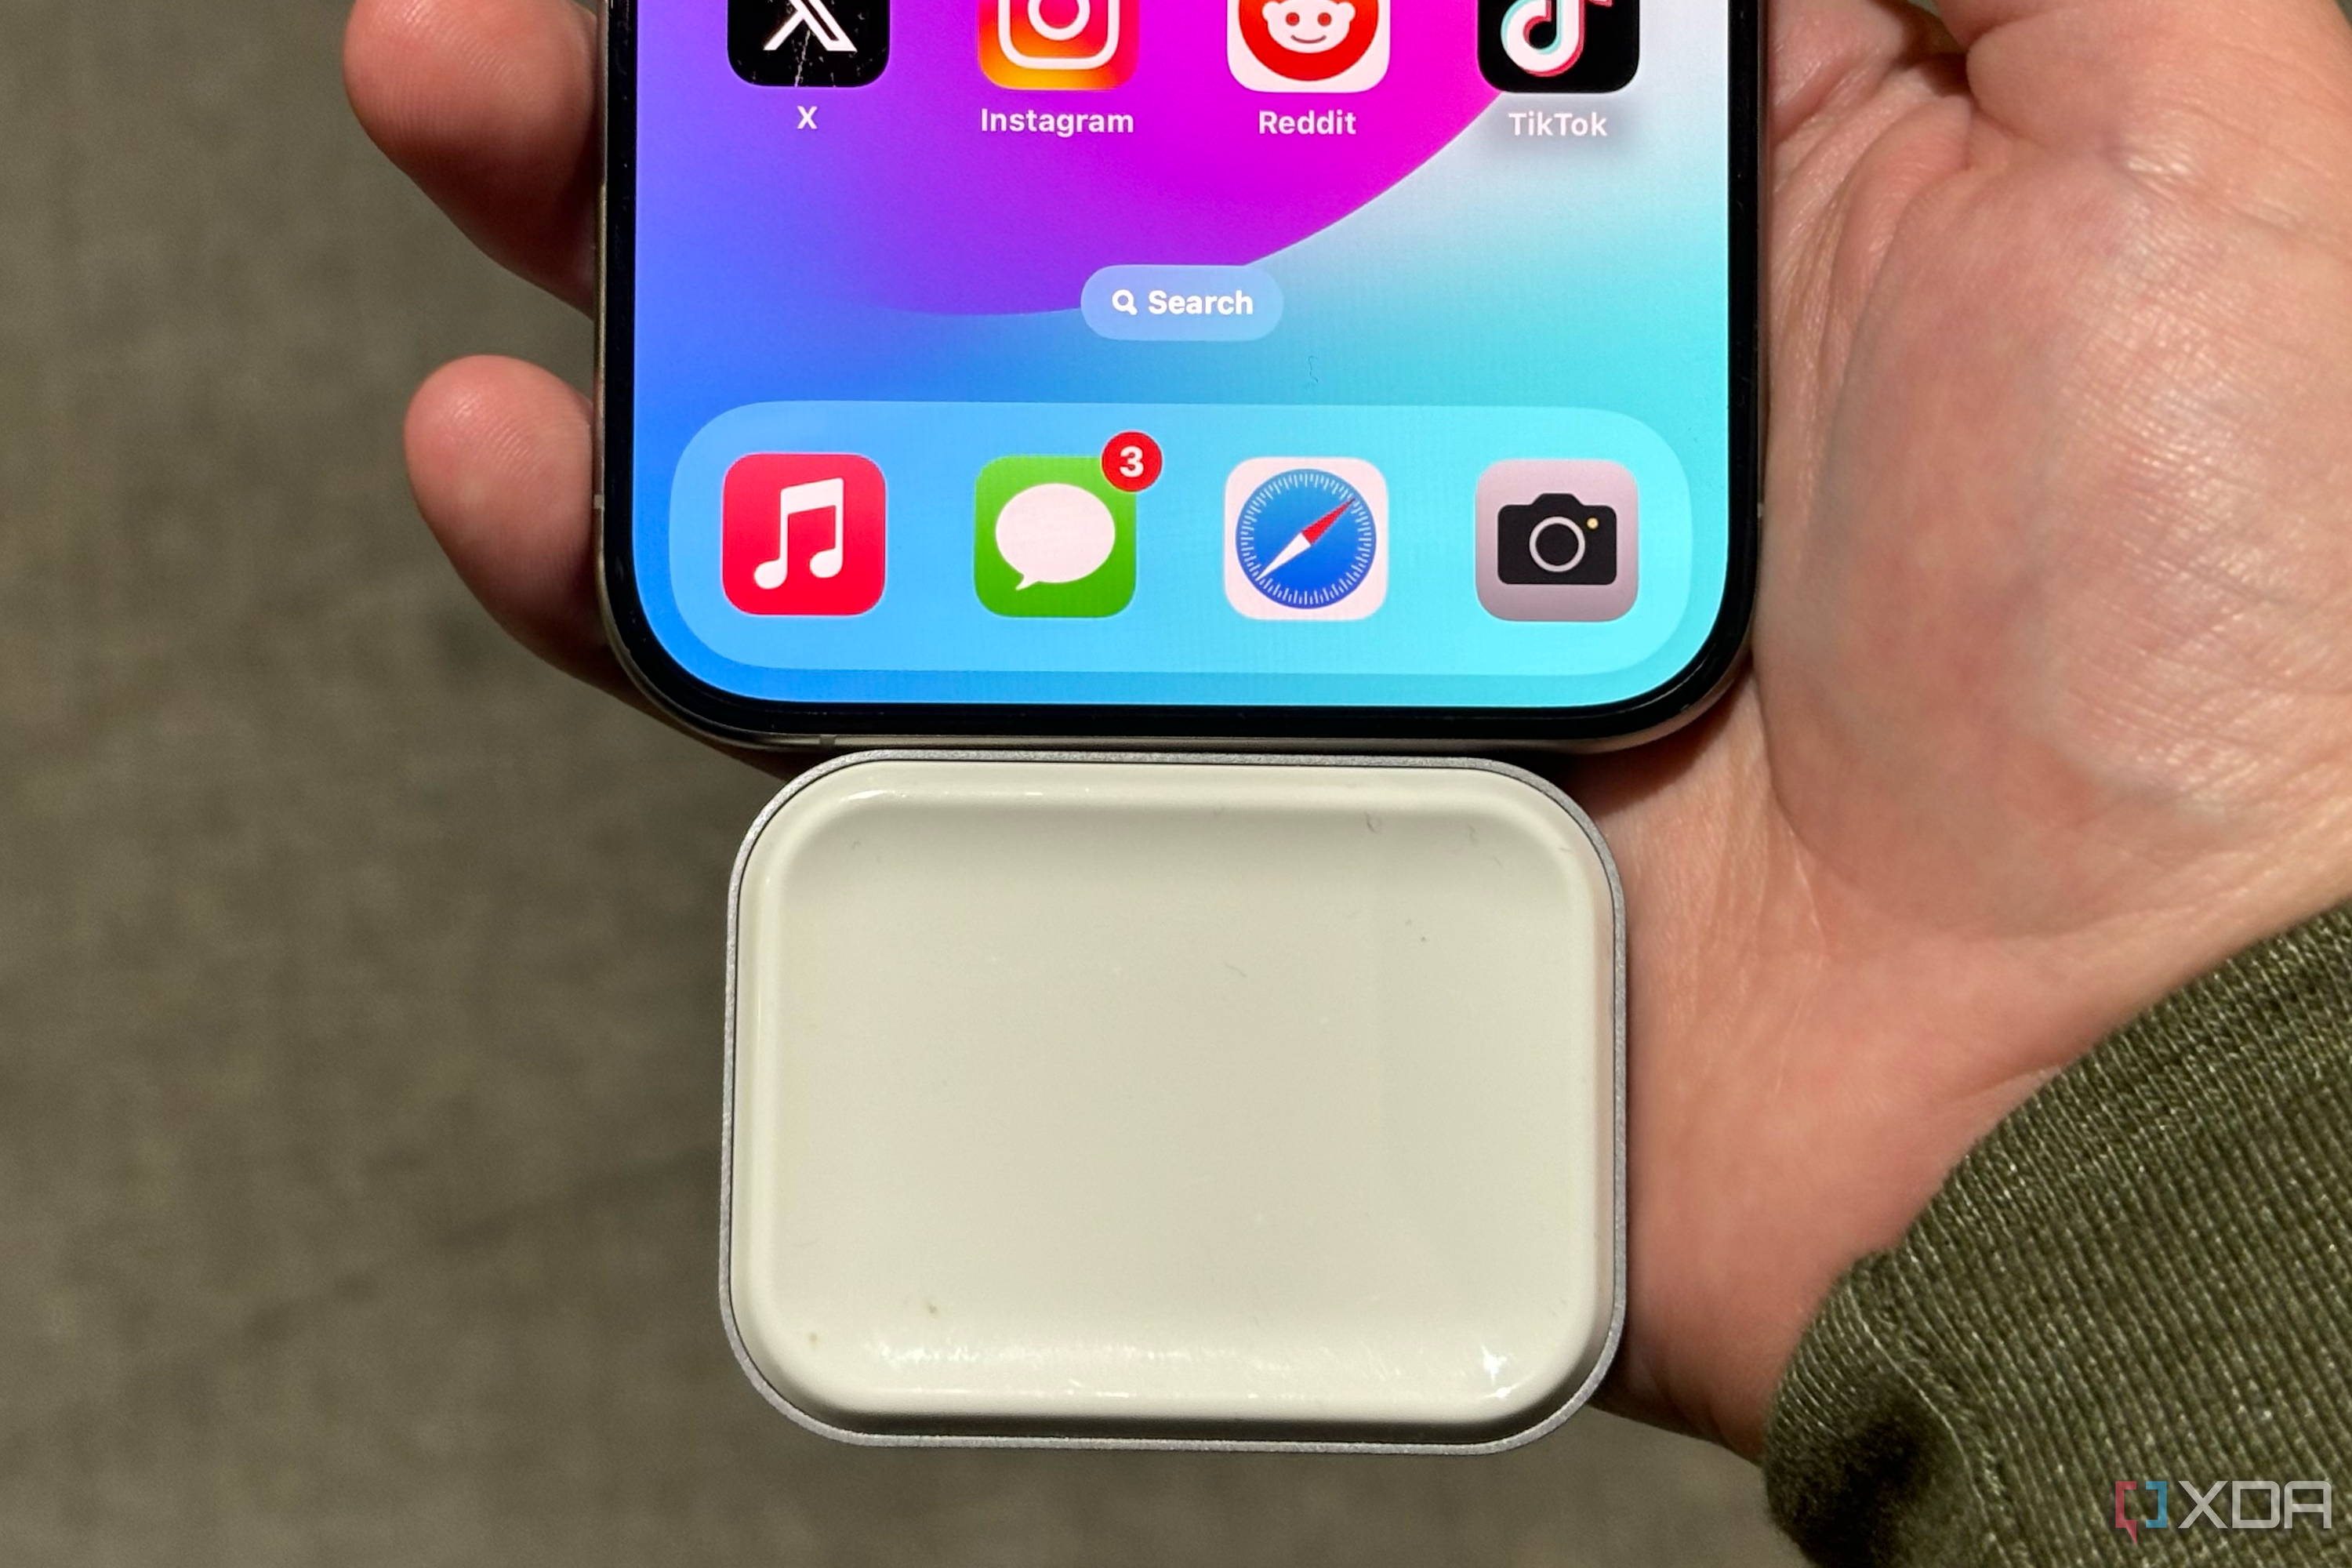 An AirPods wireless charging dongle from Satechi.